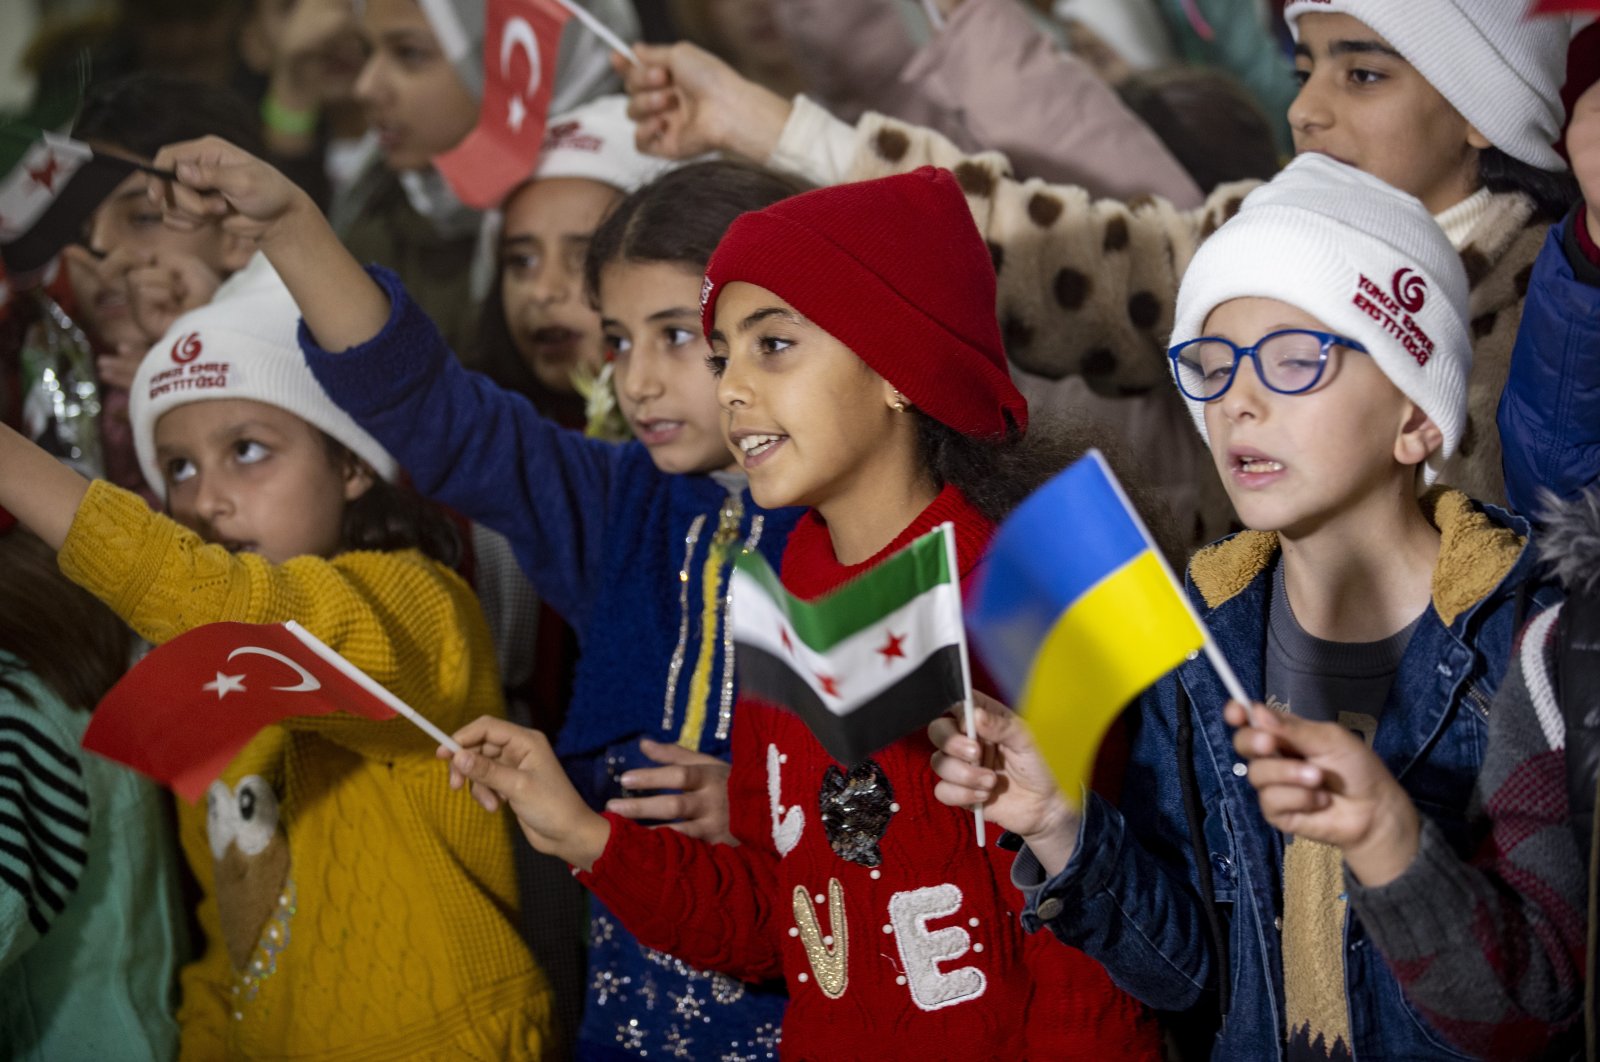 Syrian and Ukrainian children wave flags during the event, in Antalya, southern Türkiye, Nov. 24, 2022. (AA Photo)